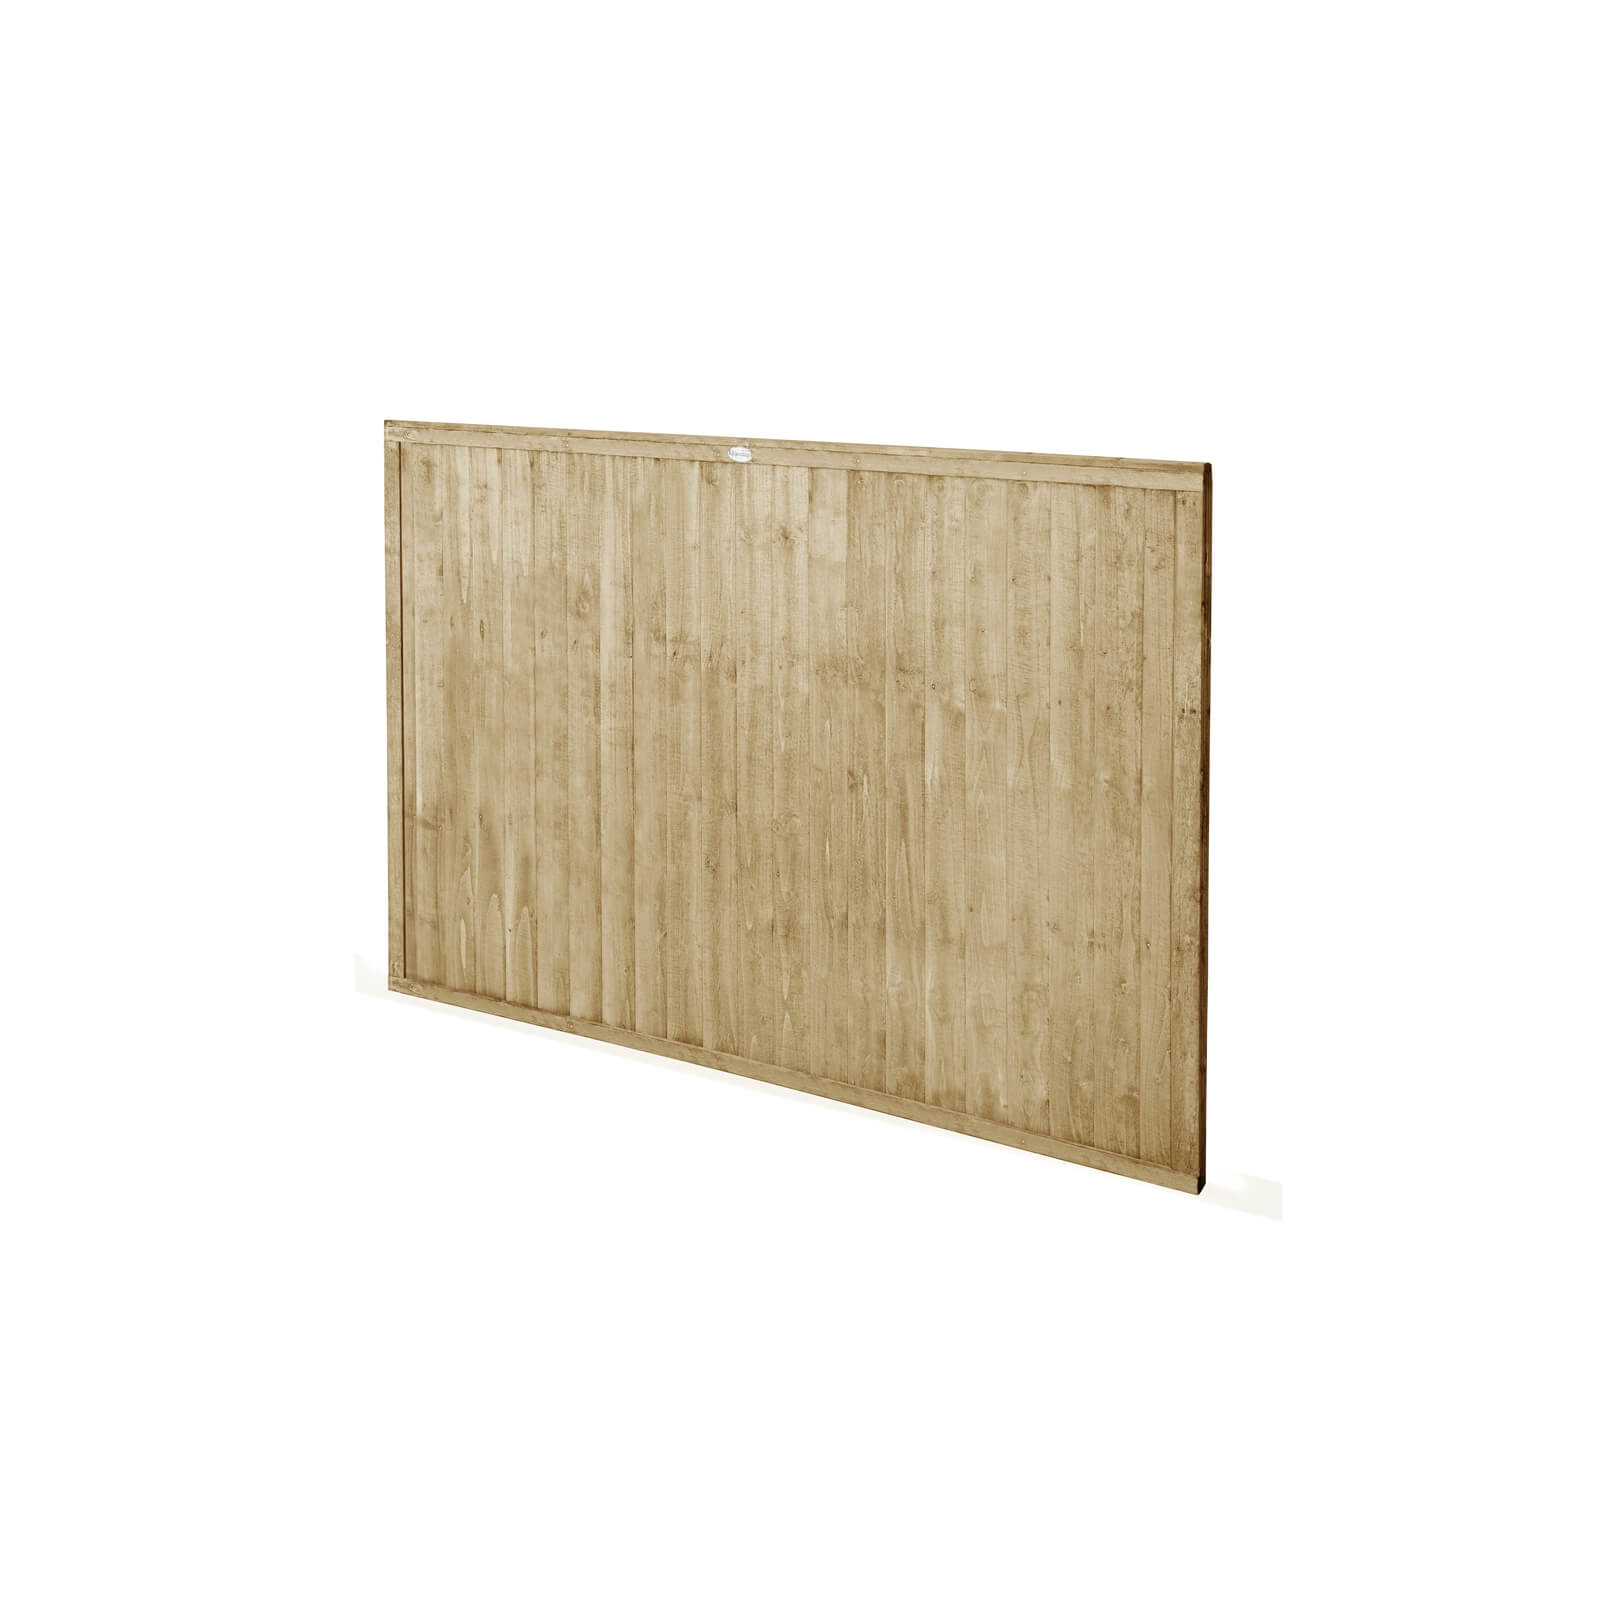 6ft x 4ft (1.83m x 1.22m) Pressure Treated Closeboard Fence Panel - Pack of 4